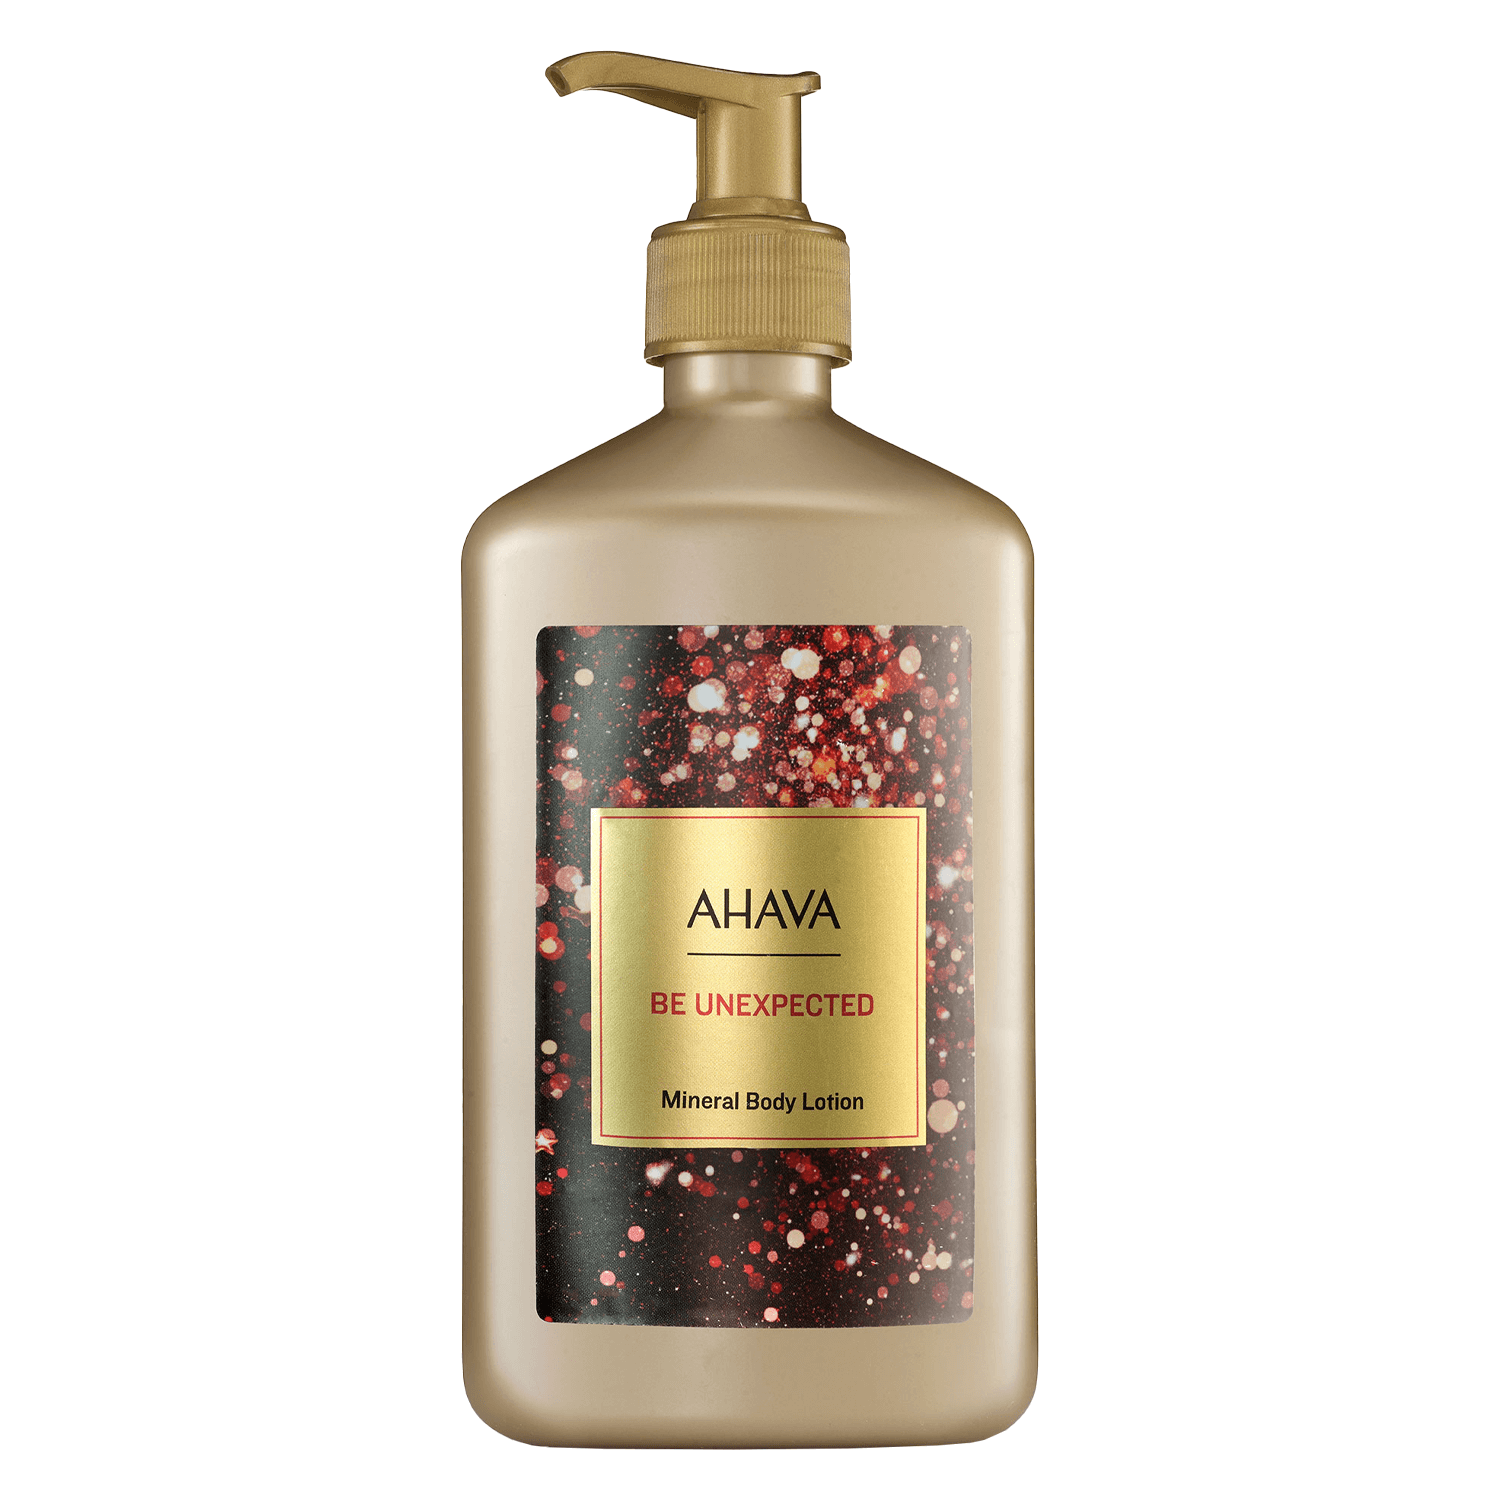 Produktbild von Ahava Specials - Mineral Body Lotion Be Unexpected Limited Edition